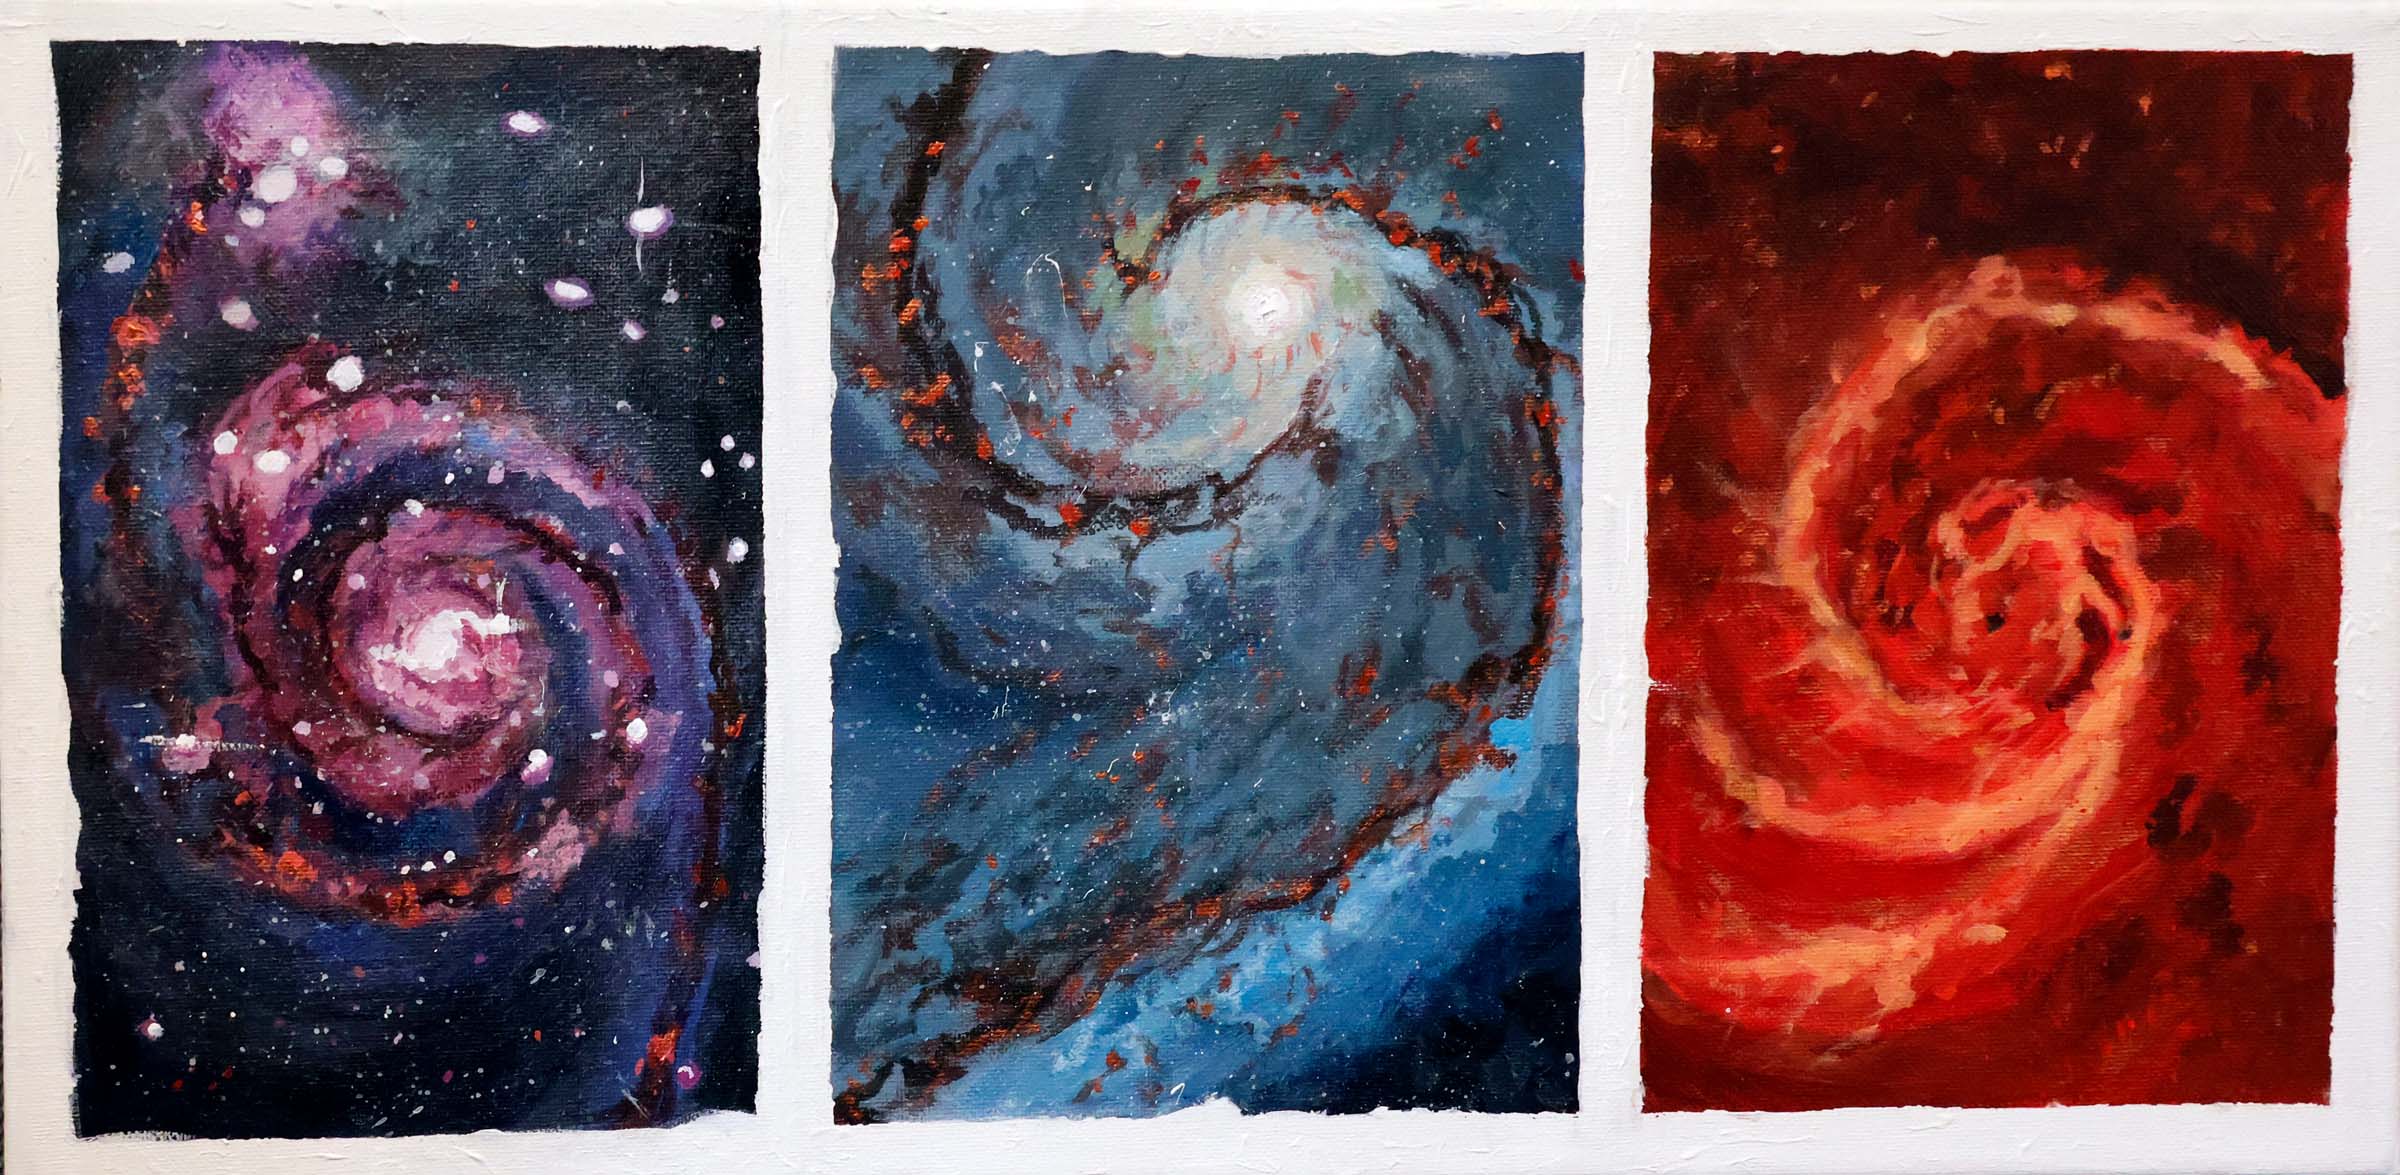 The canvas is subdivided into three images. They are all of the same galaxy but with different colors and features. The left image uses pinks and purples, and many distinct, fully resolved sources are visible. The central version has dark, black, and red arms of the spiral galaxy that emanate a cyan glow. The right image is dominated by reds and oranges, and the spiral itself is suffused with a hazy glow.